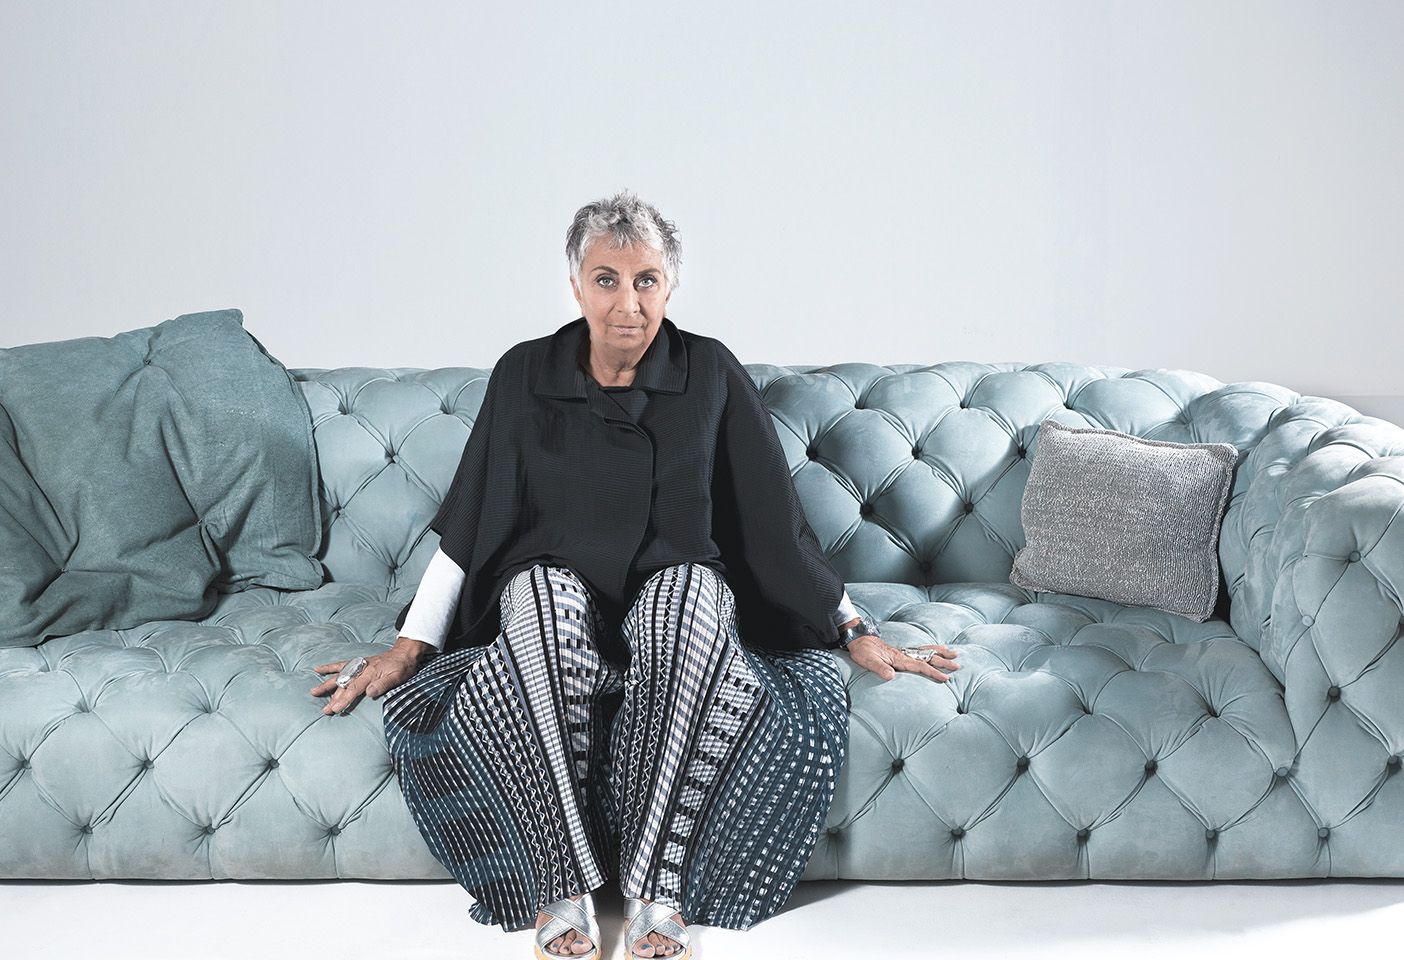 Designer Paola Navone whose inquisitive mind shapes craft and detail focused collections for brands including Baxter. Photo c/o Baxter. 